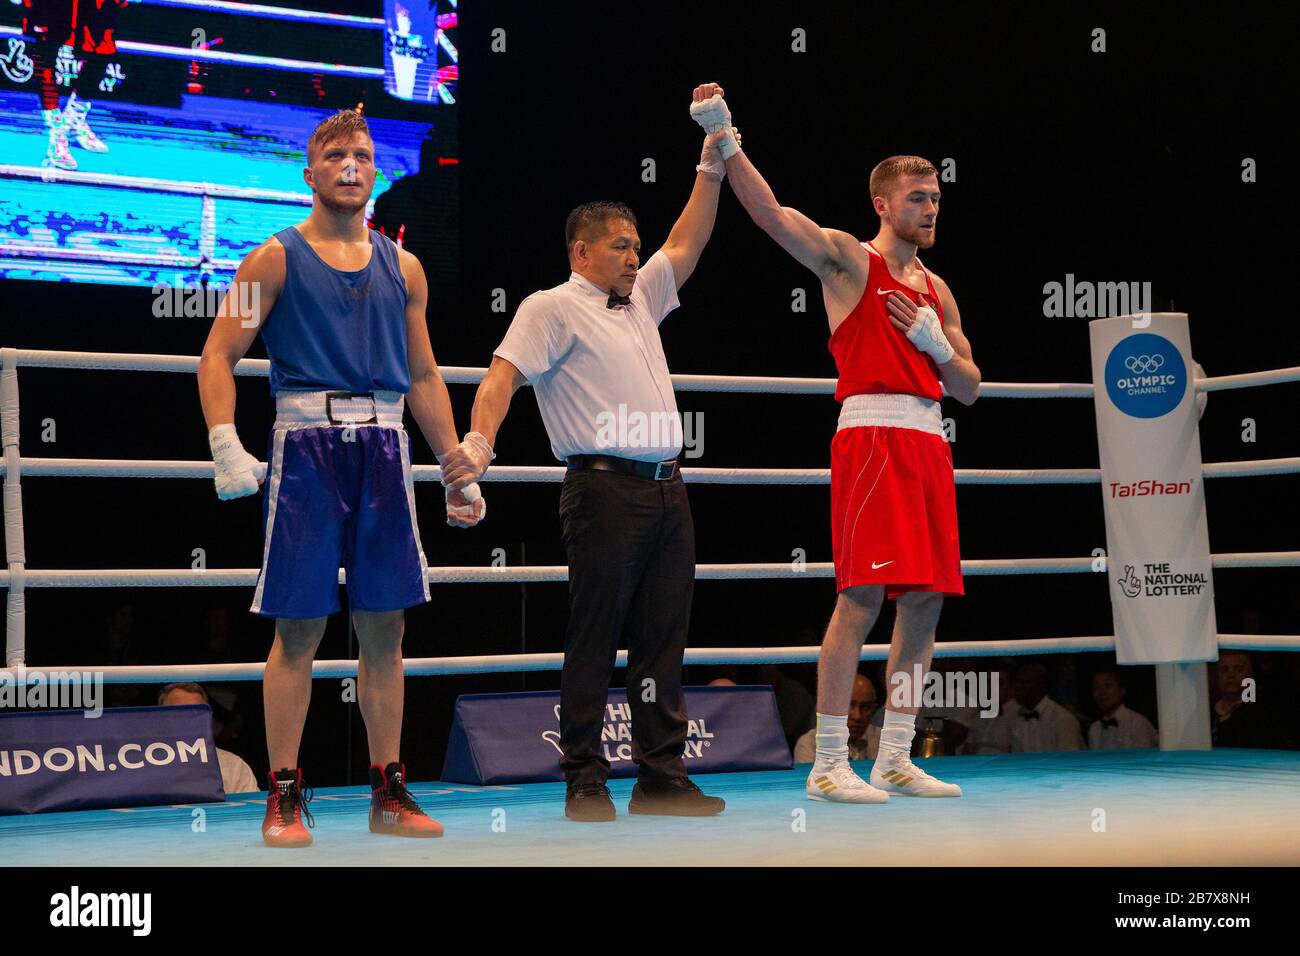 London, UK. 16-03-20. Adam Chartoi (SWE) RED fights Sorin-Mihai Caliniuc  (ROU) BLUE during the Road to Tokyo European Olympic Boxing Qualification  Stock Photo - Alamy